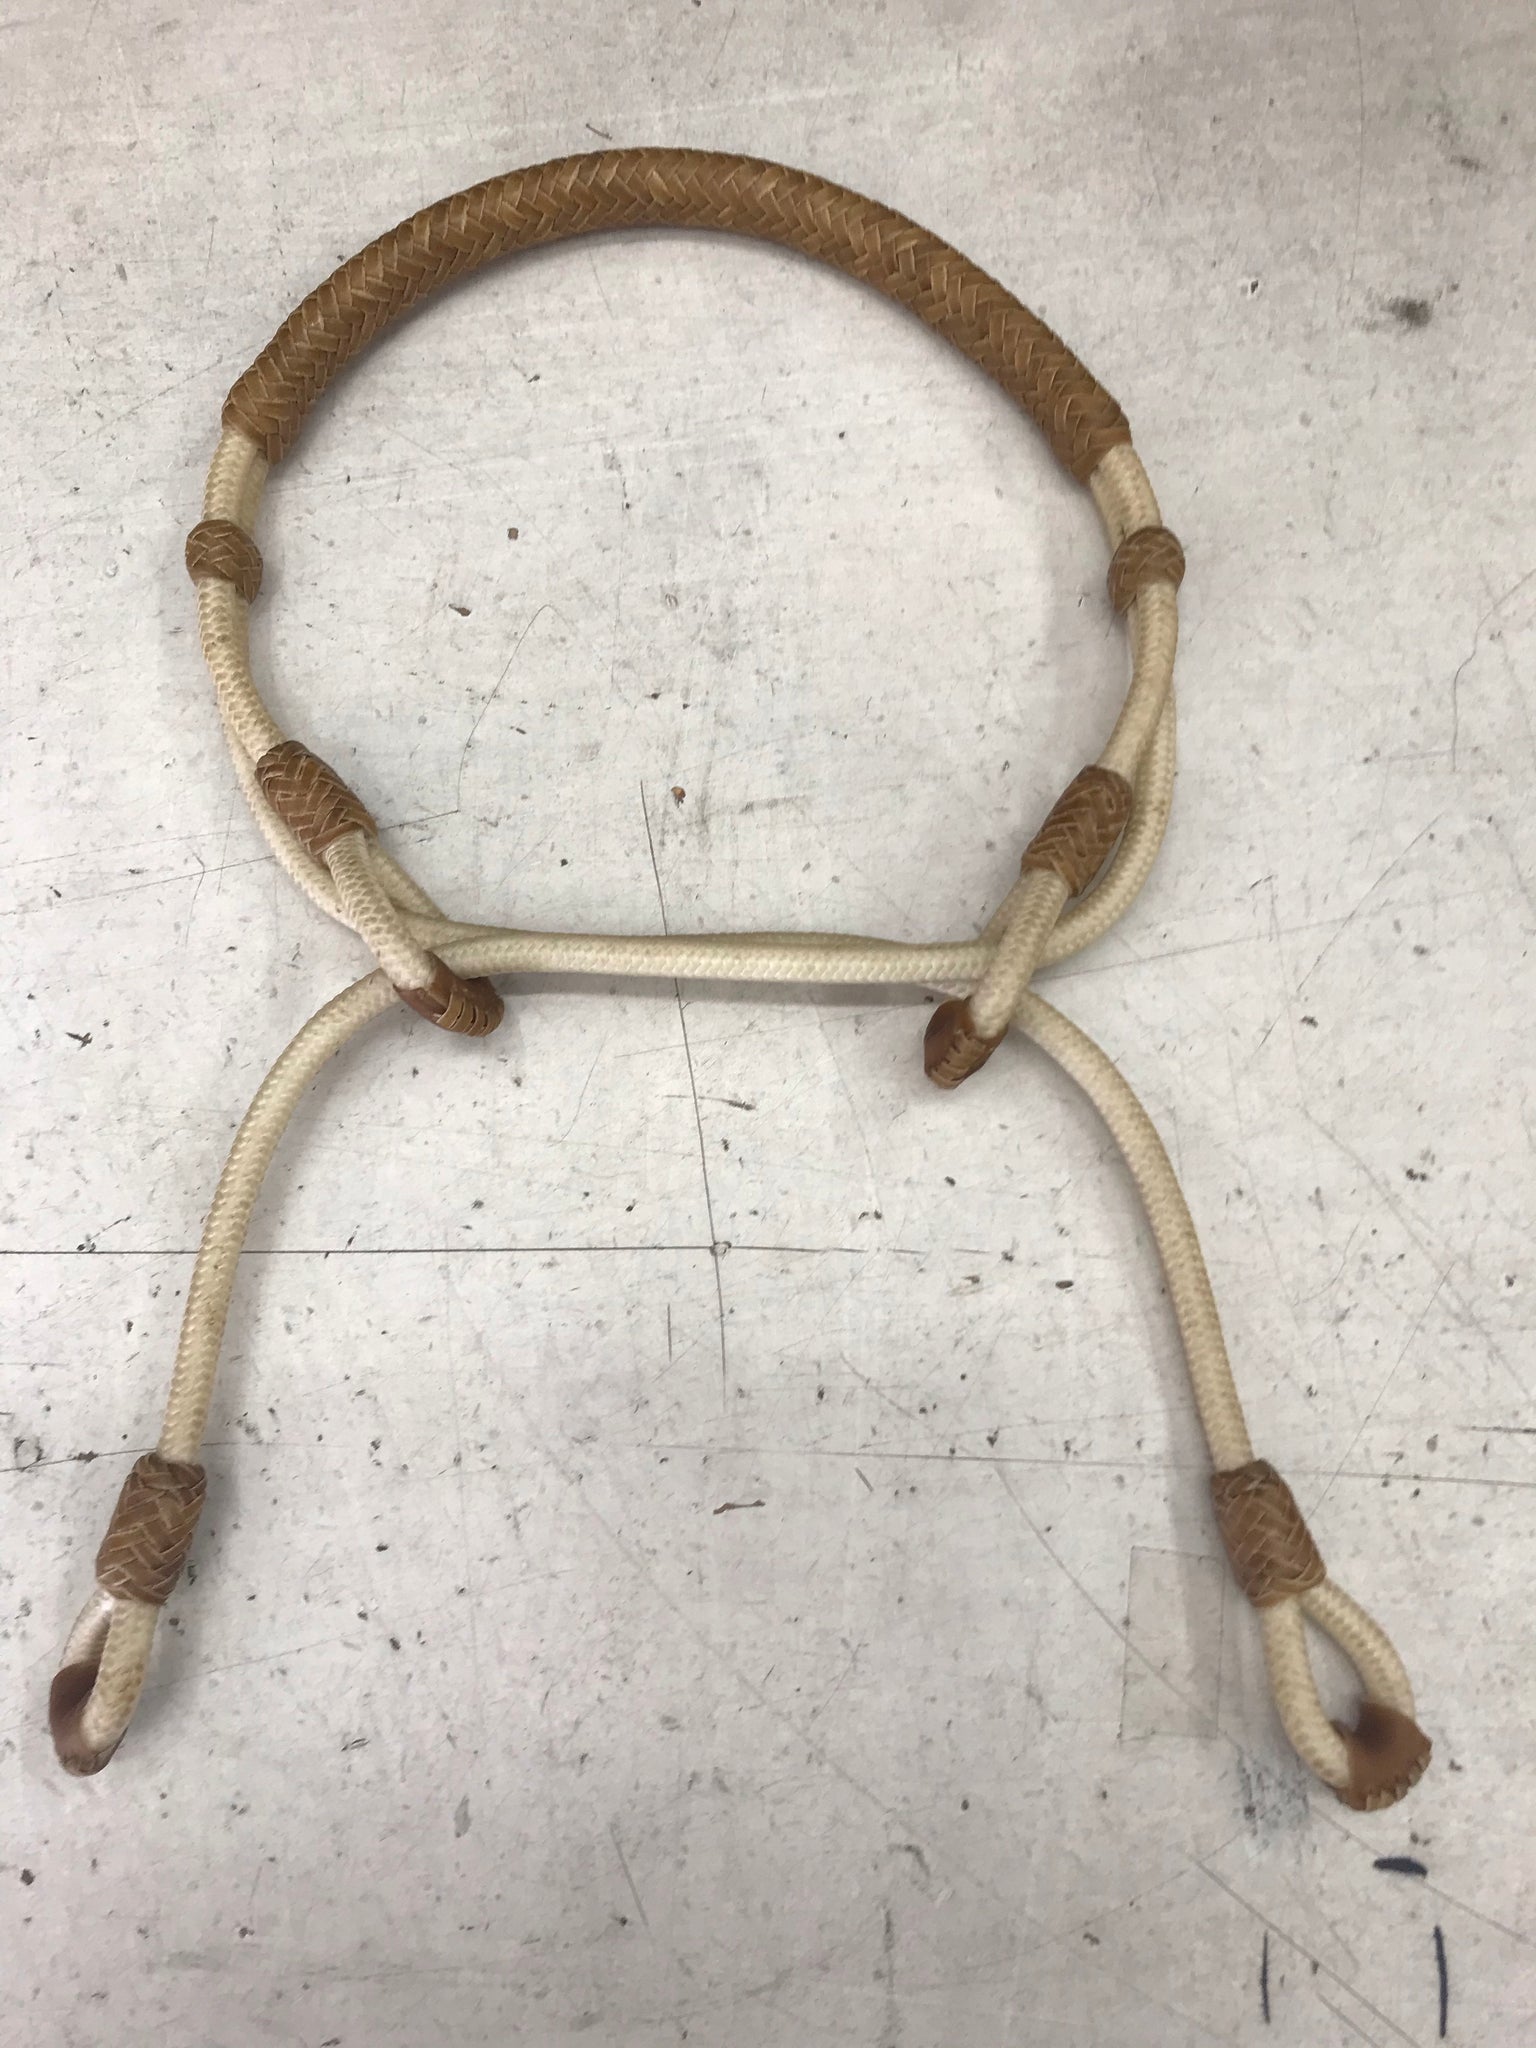 Indian Rope Bosal for Bitless Riding - The Homestead Tack Shop